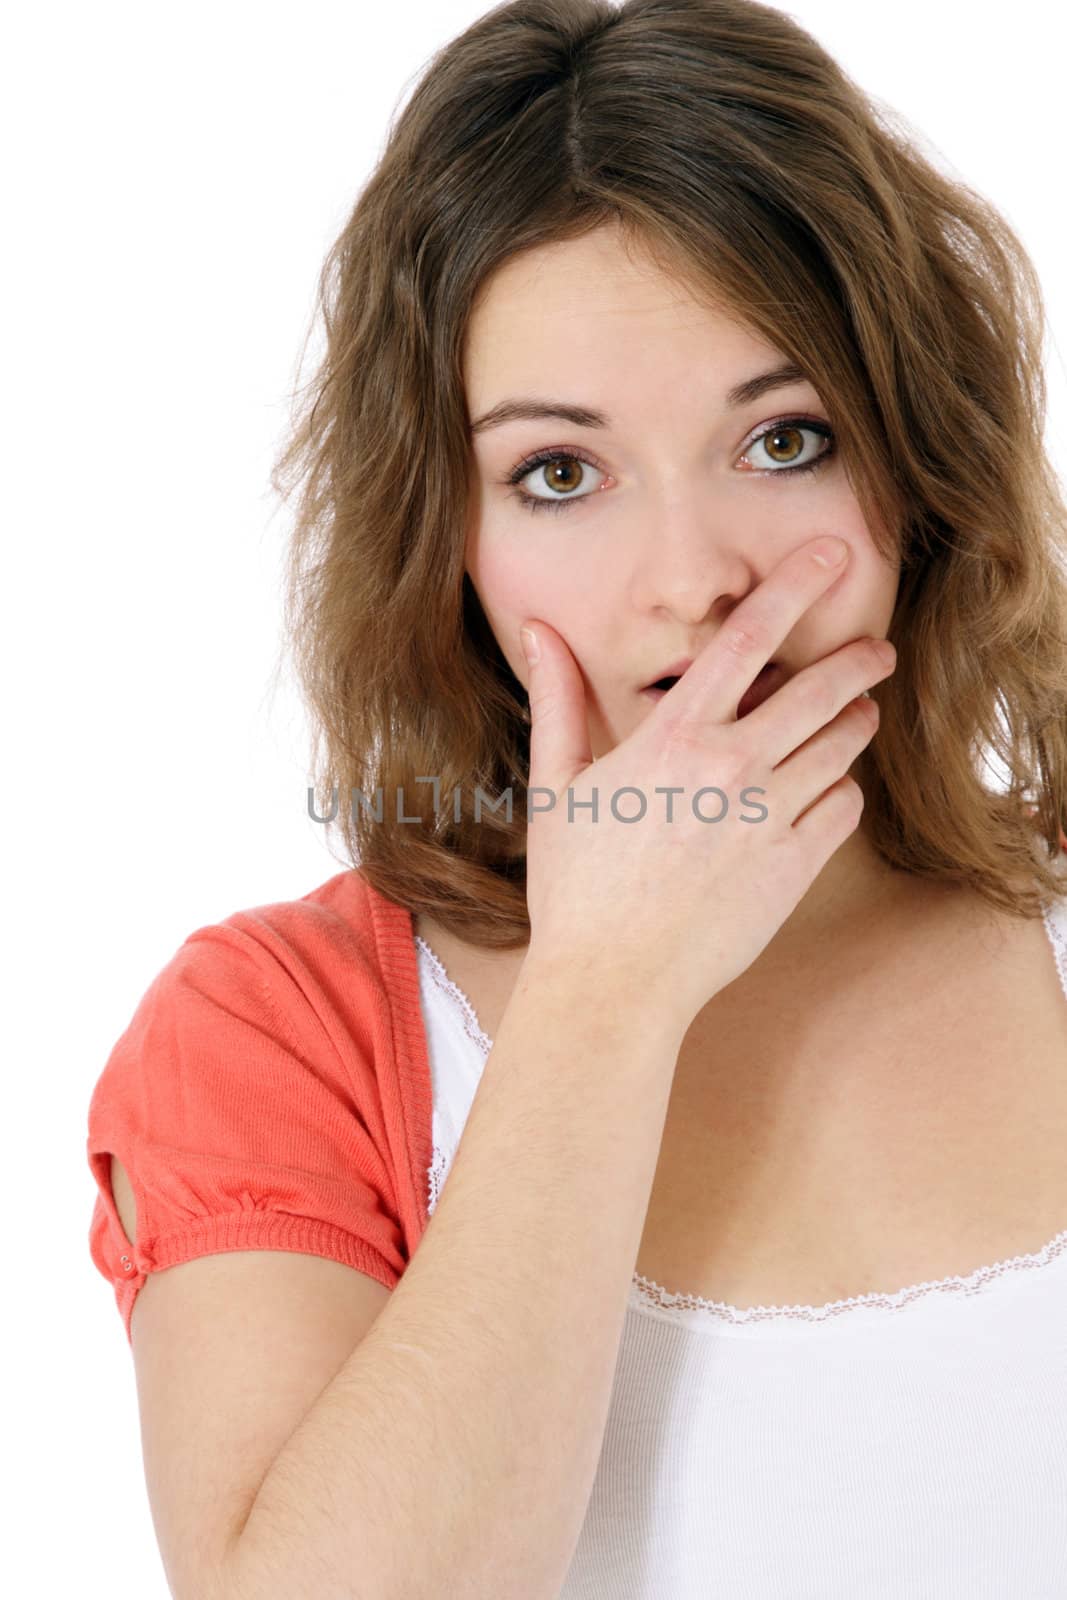 Surprised young woman. All on white background.